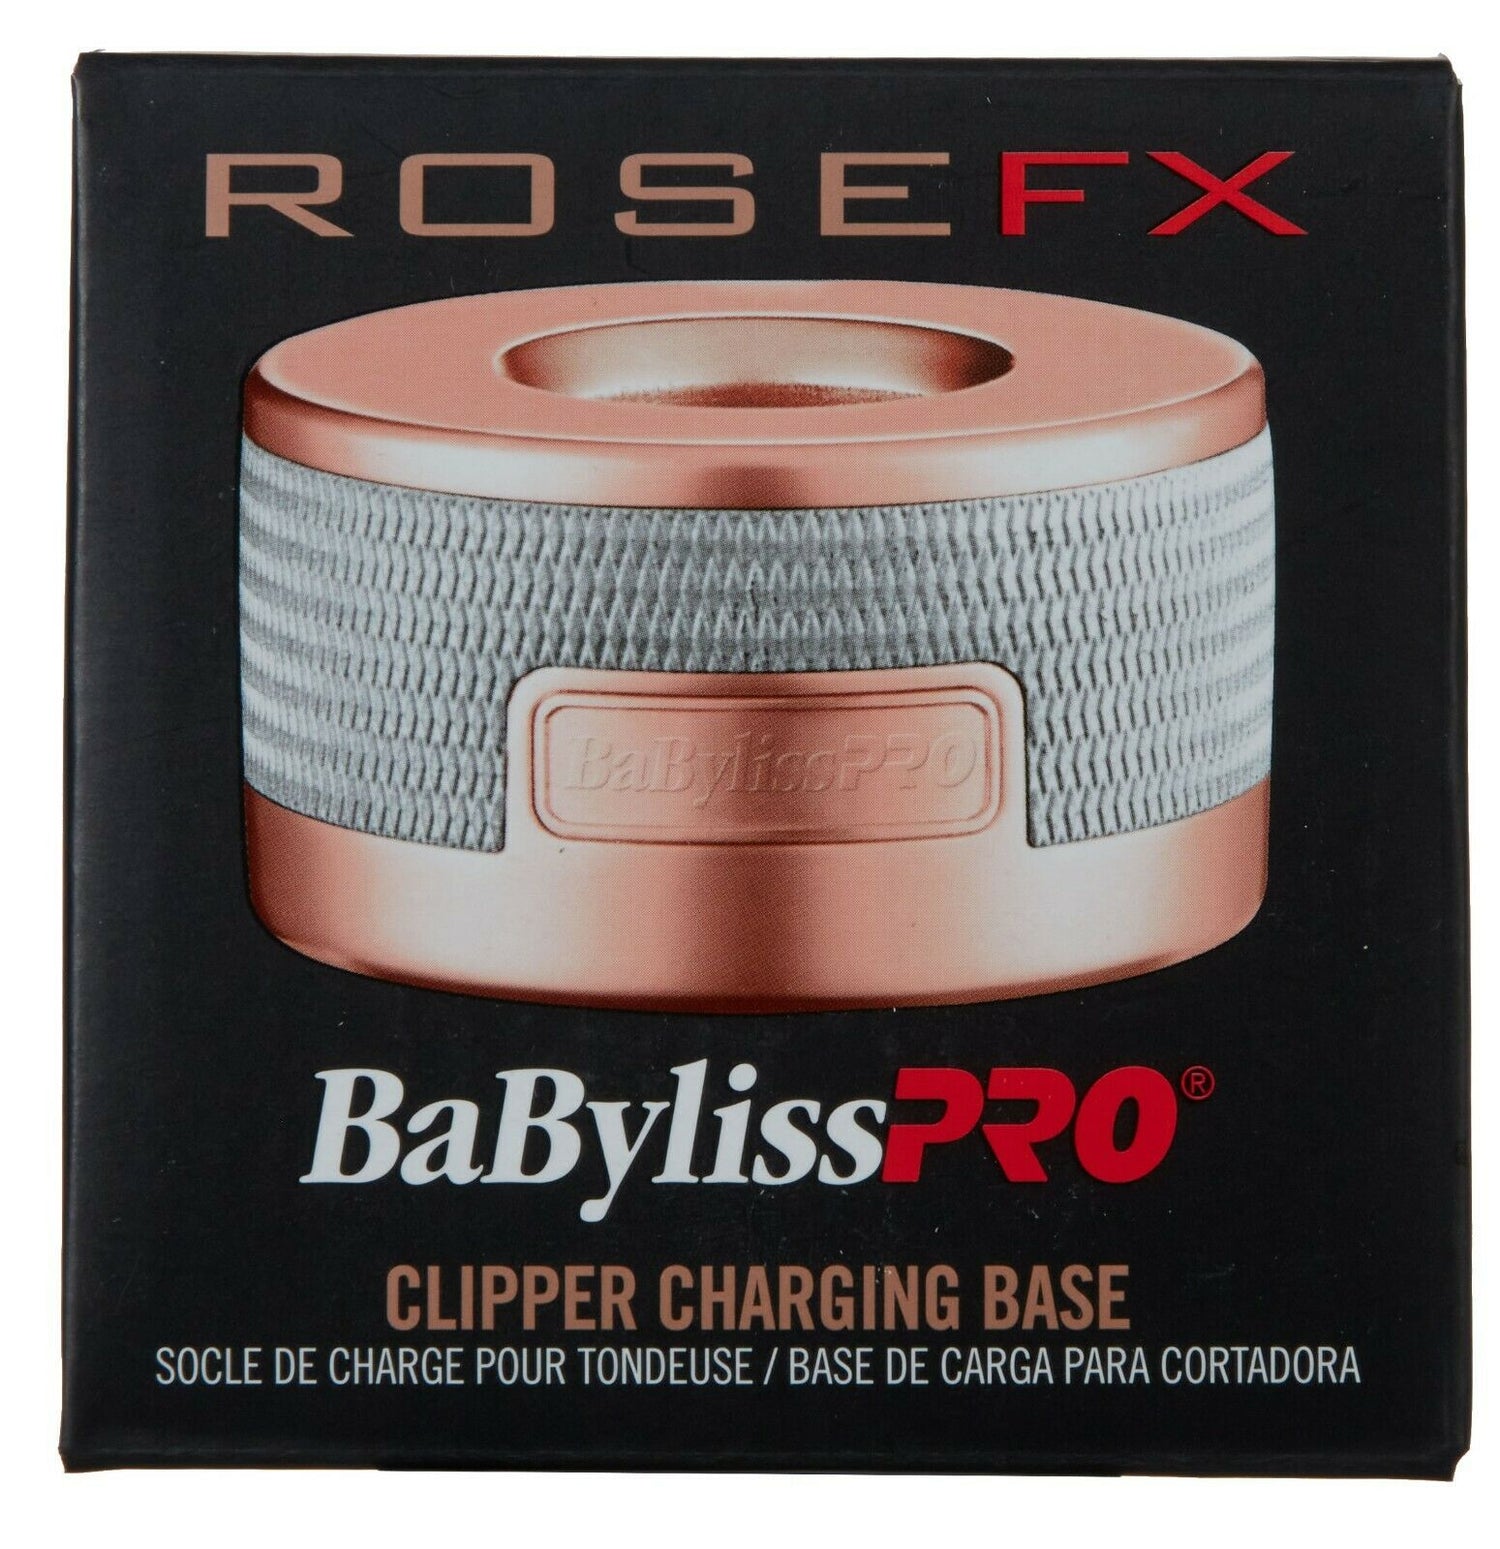 BaByliss PRO Clipper Charging Stand Base Model FX870 Box Rosefx